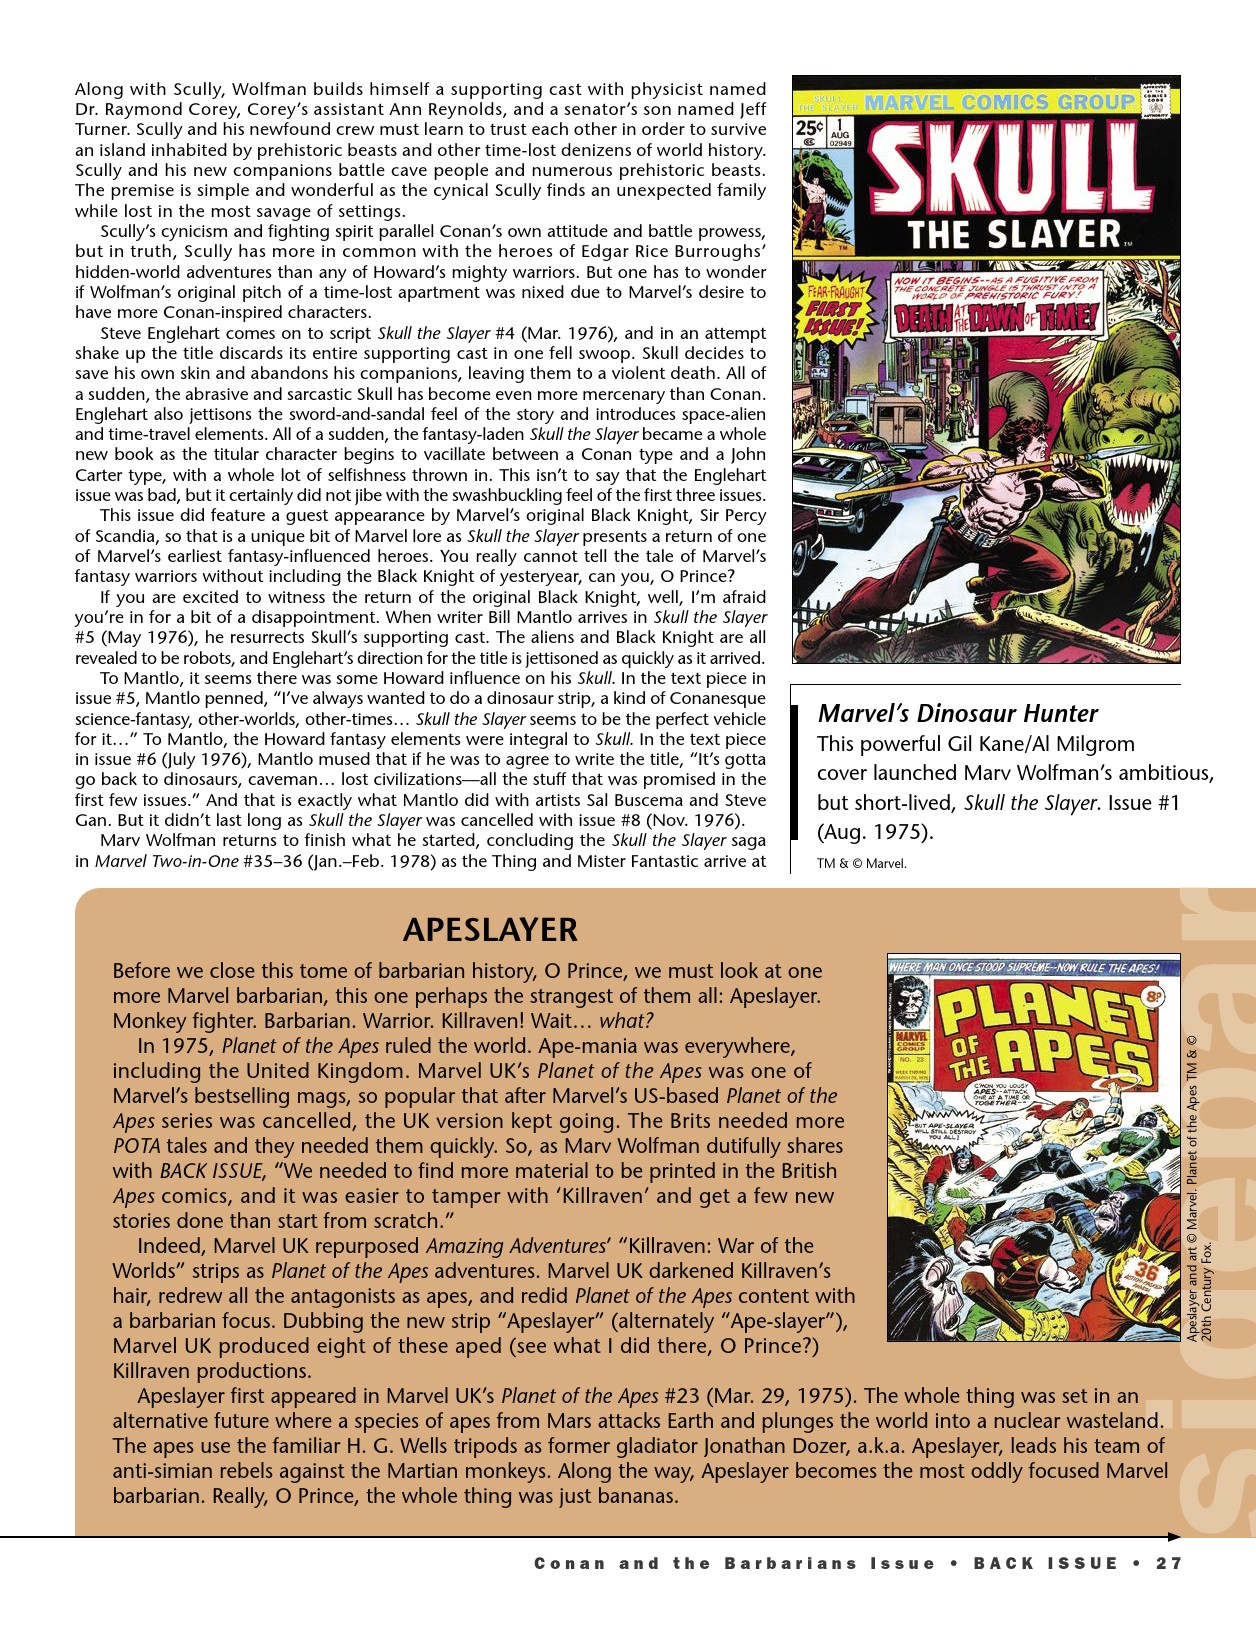 Read online Back Issue comic -  Issue #121 - 29